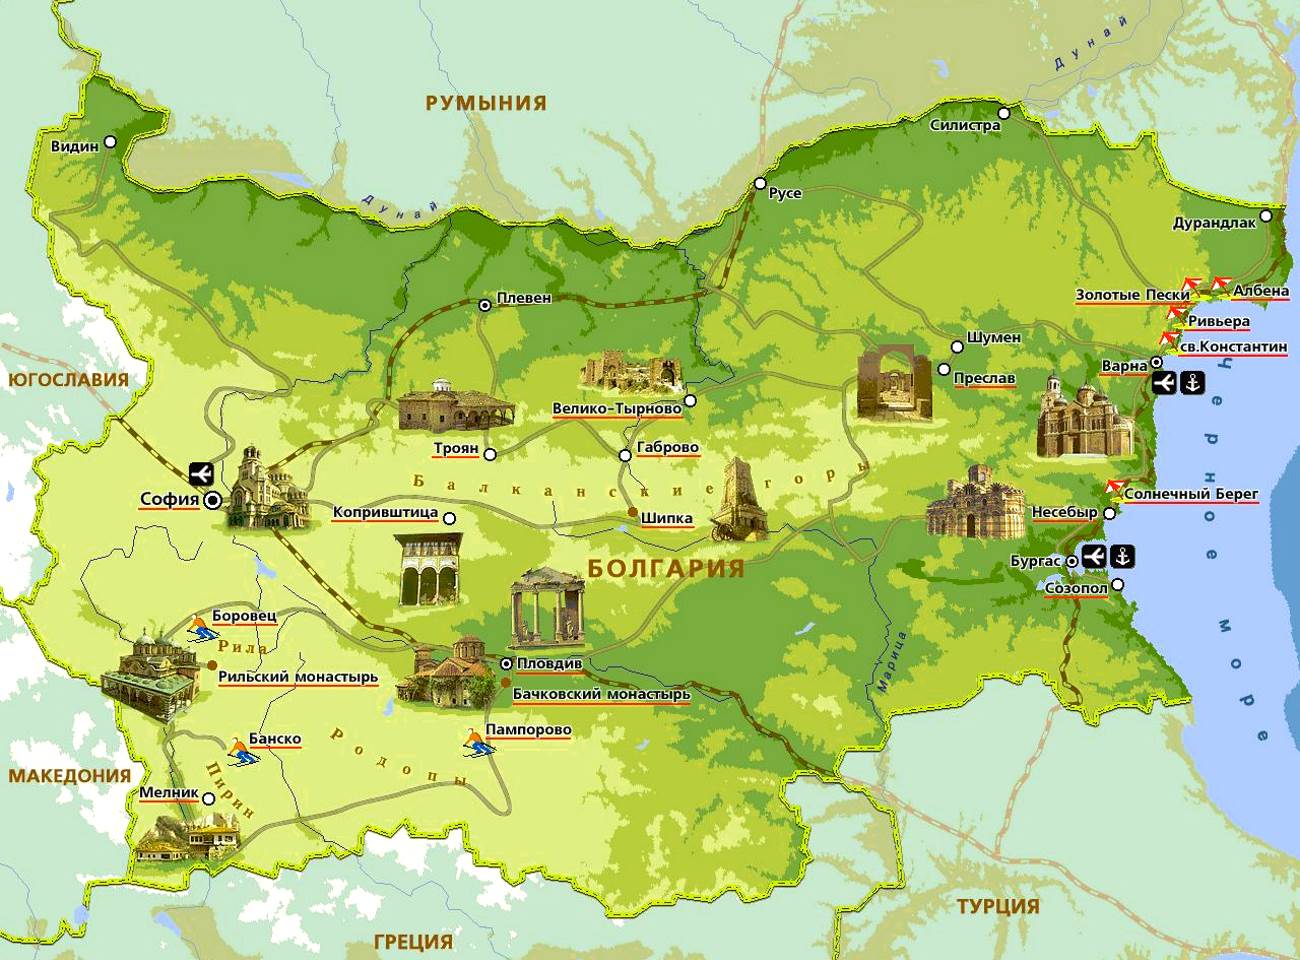 Bulgarian sights on the map